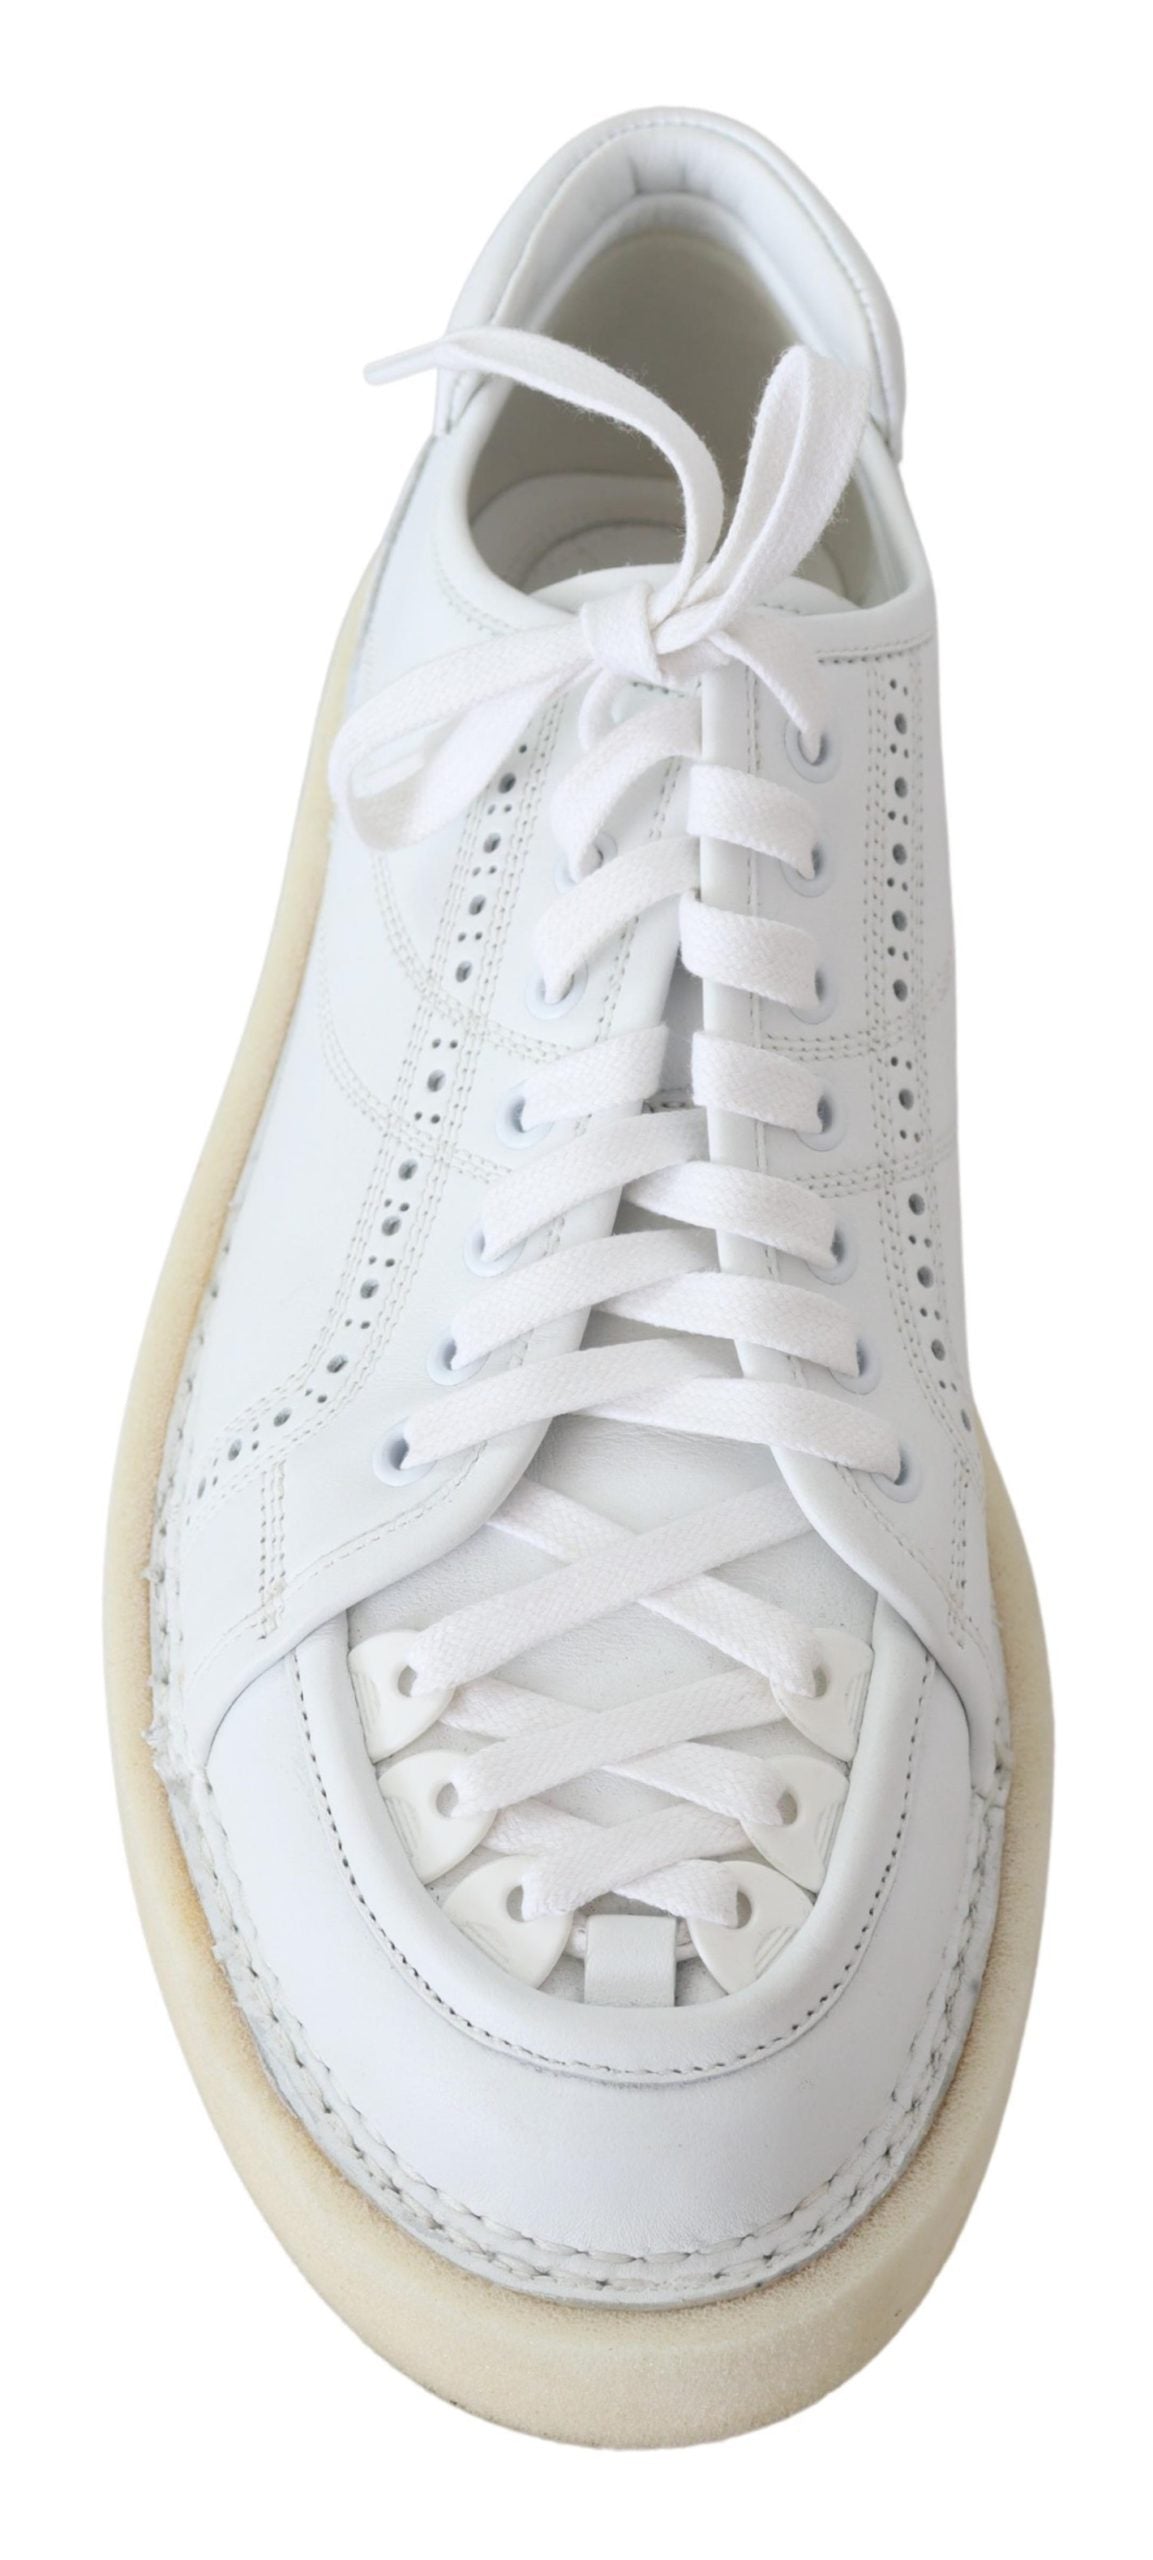 White Woven Leather Low Top Sneakers Shoes